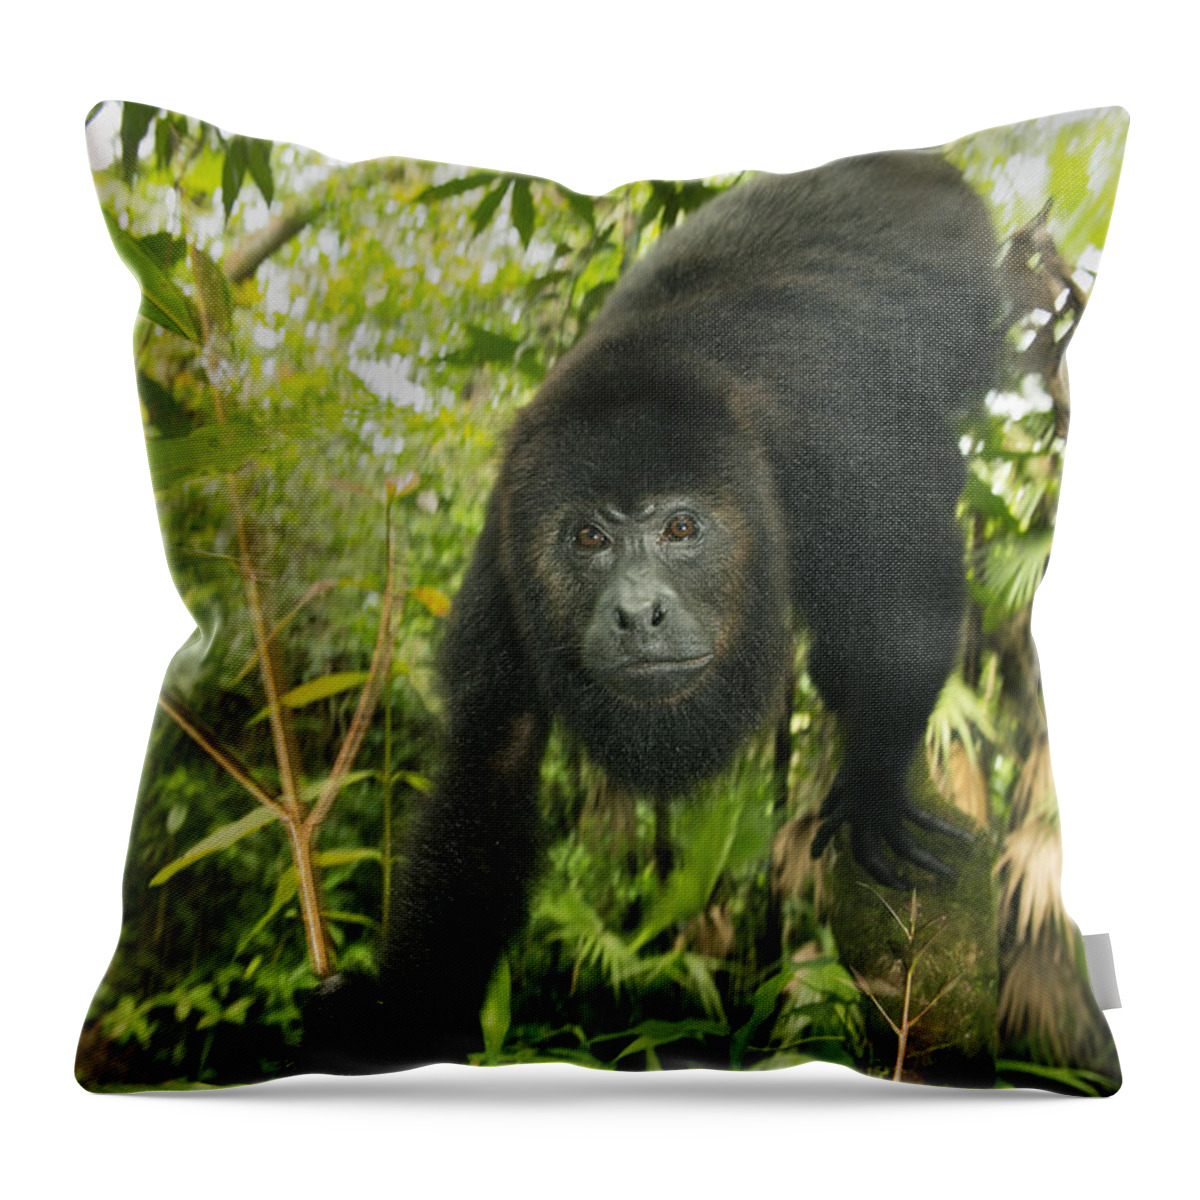 Kevin Schafer Throw Pillow featuring the photograph Mexican Black Howler Monkey Belize by Kevin Schafer